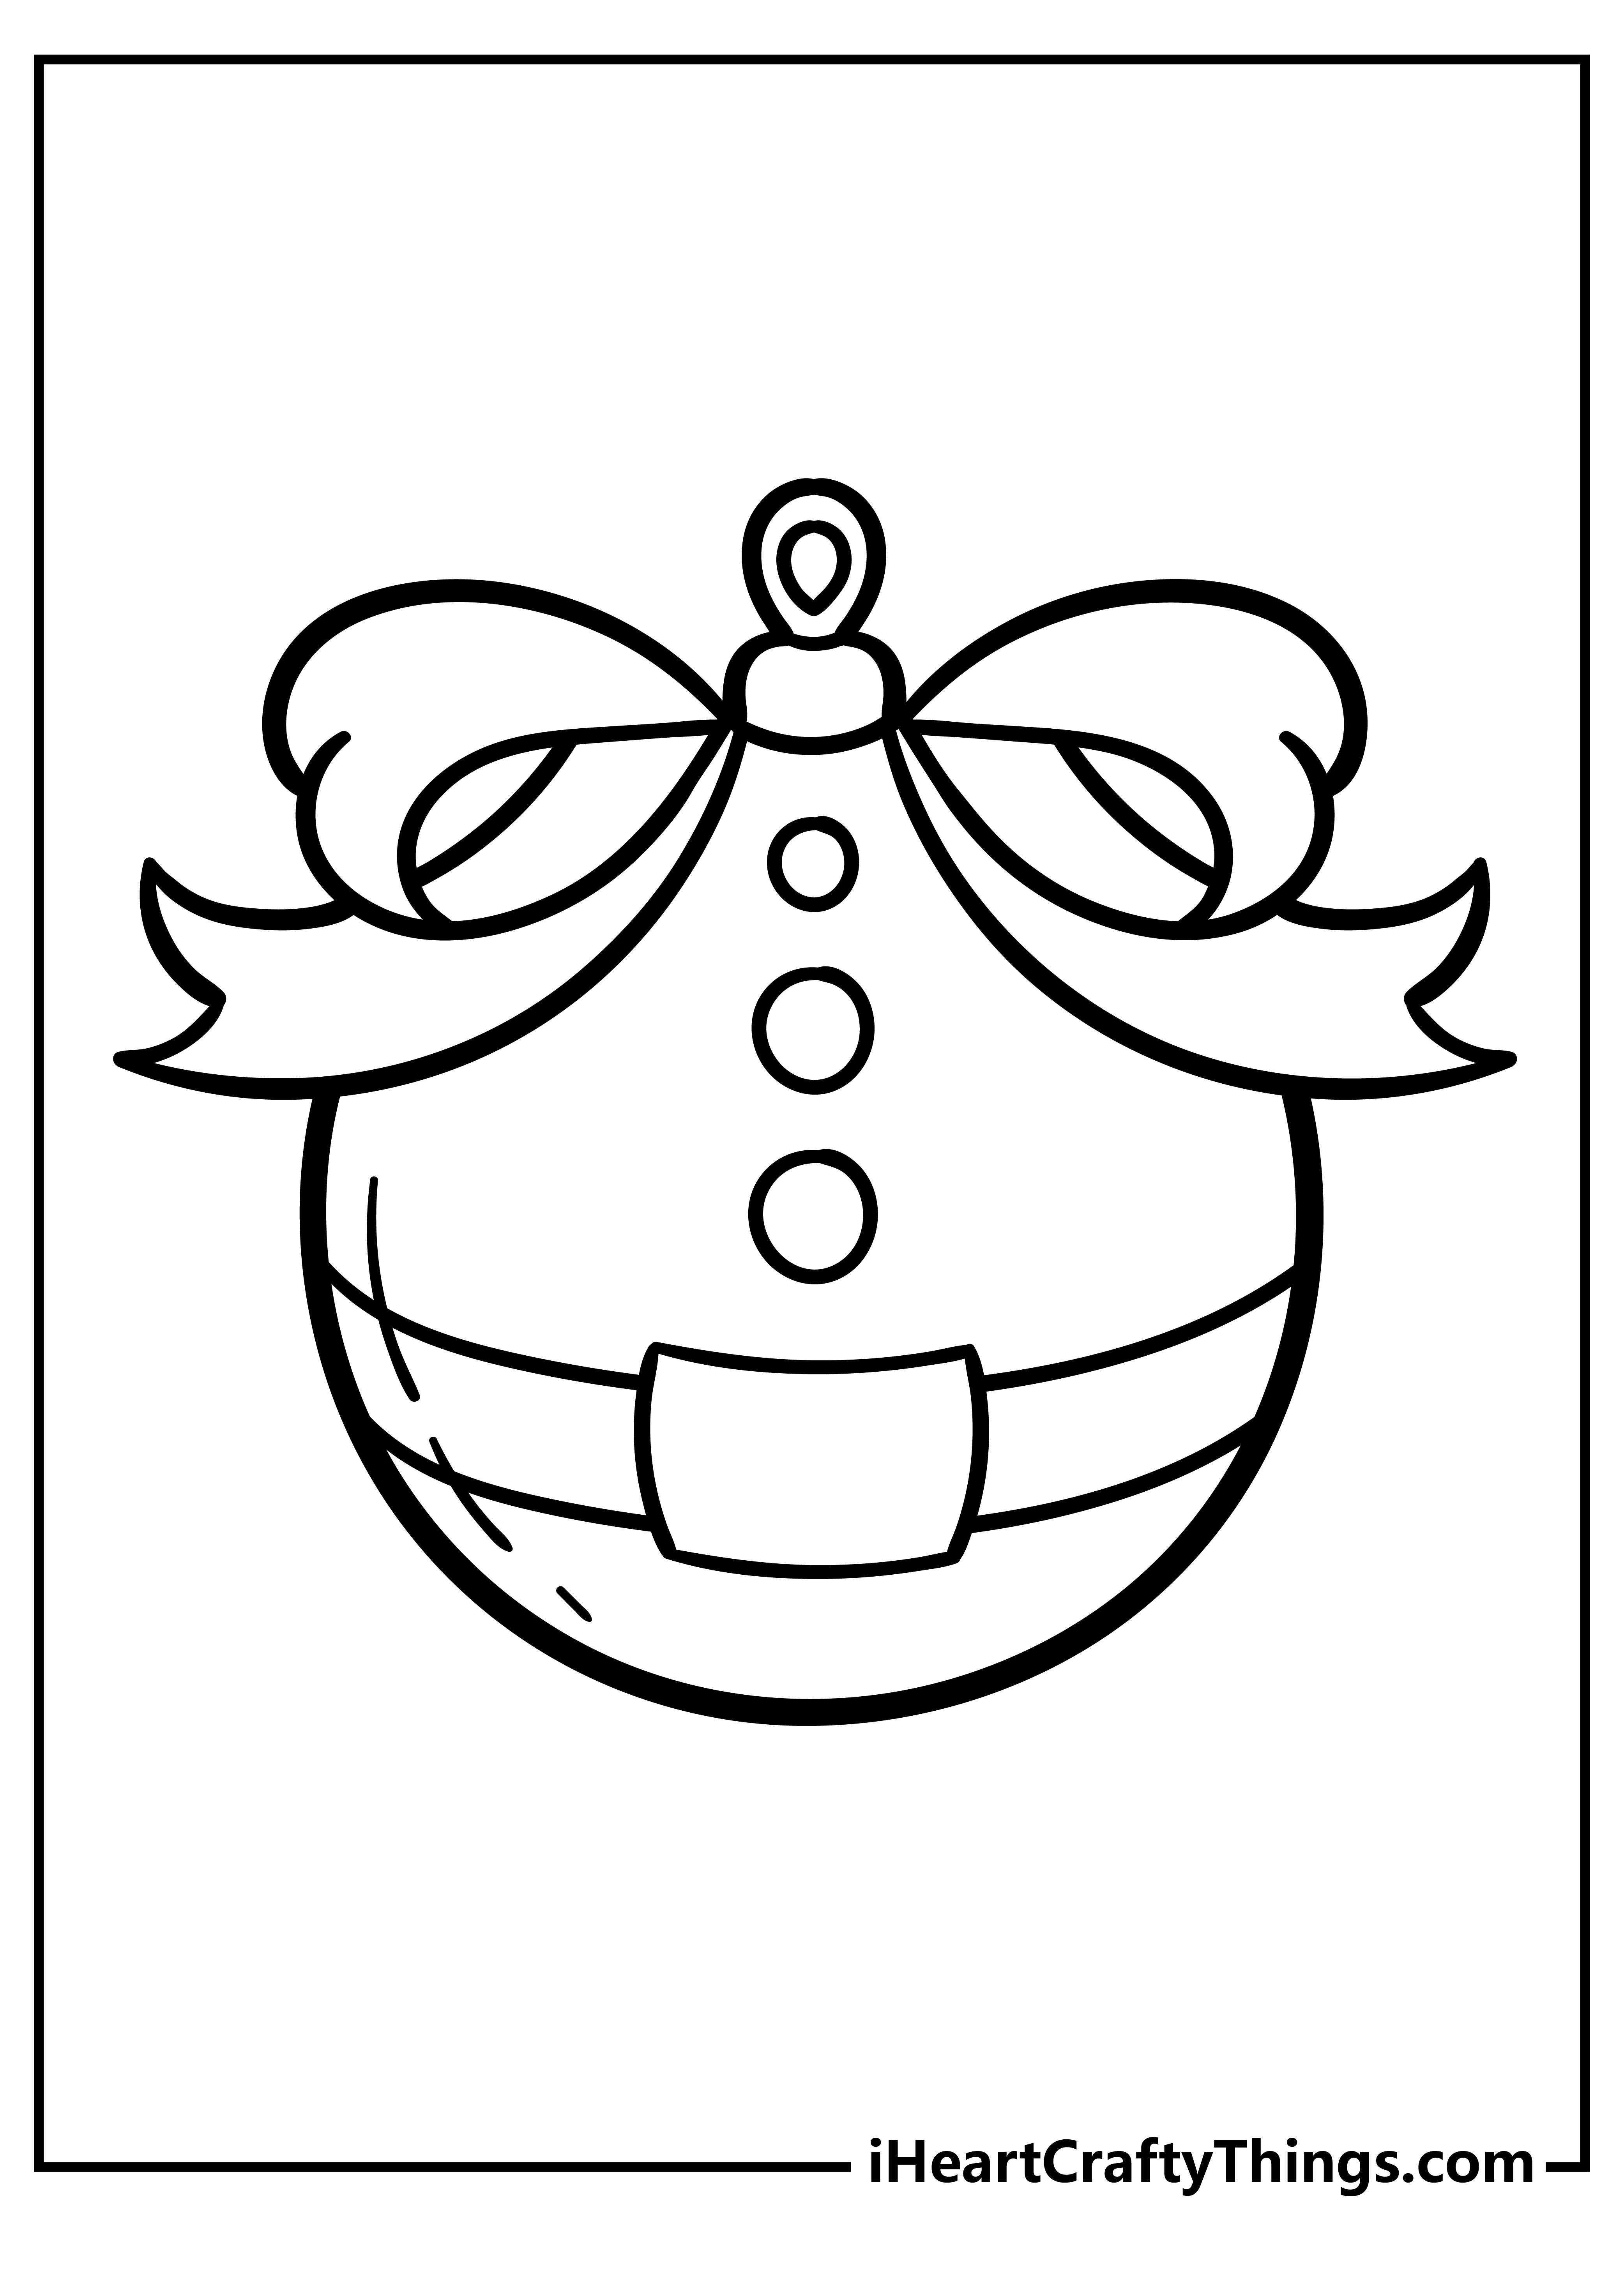 Printable Christmas Ornament Coloring Pages Updated 20